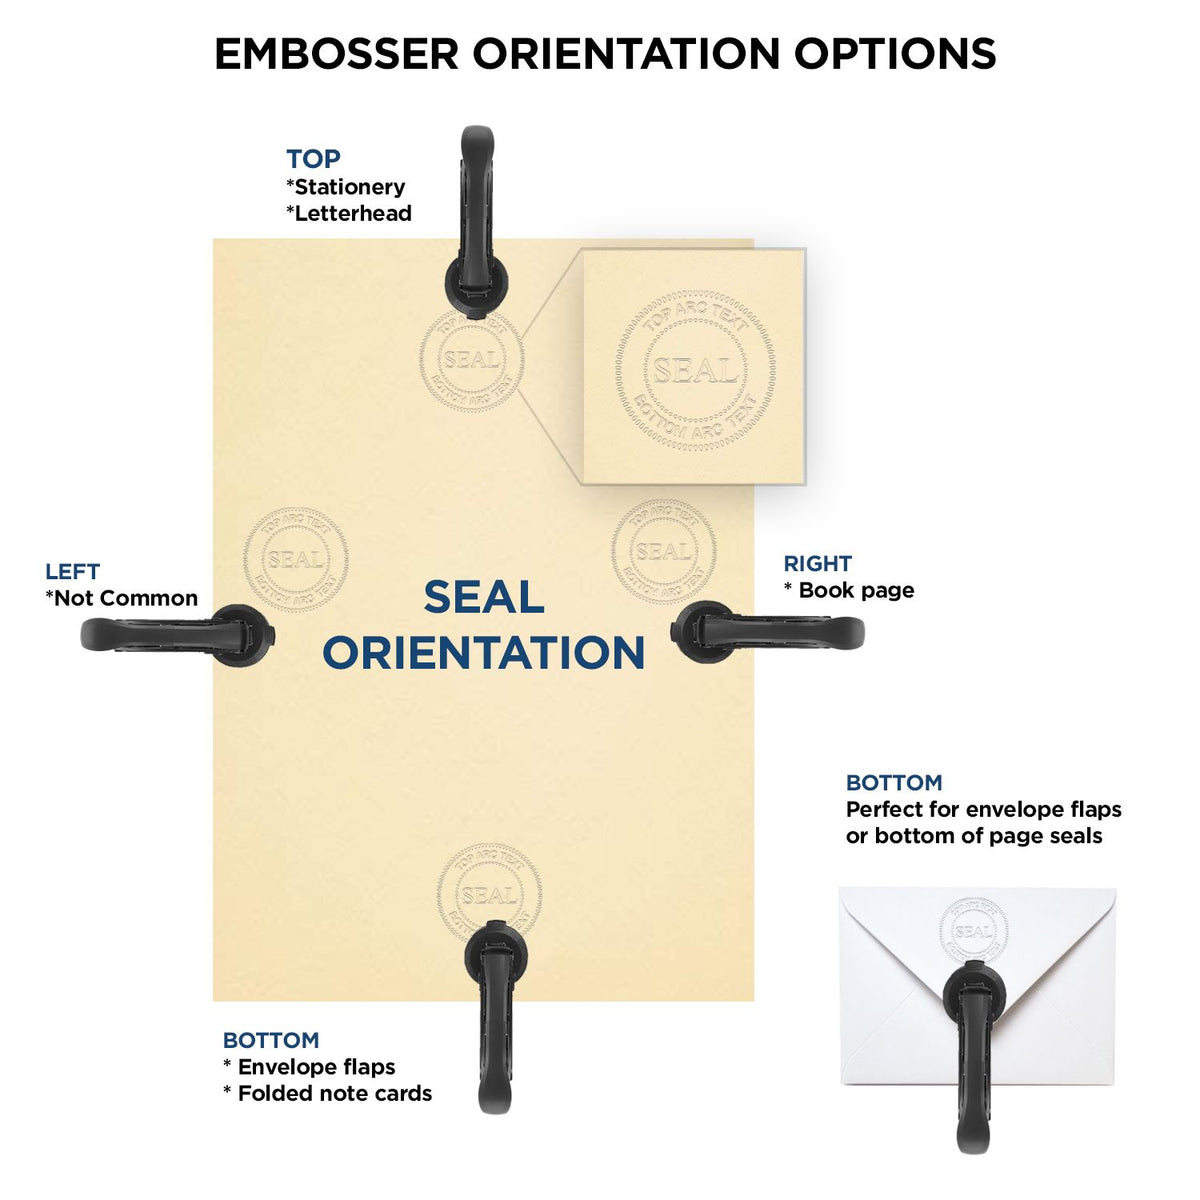 An infographic for the Gift Idaho Engineer Seal showing embosser orientation, this is showing examples of a top, bottom, right and left insert.